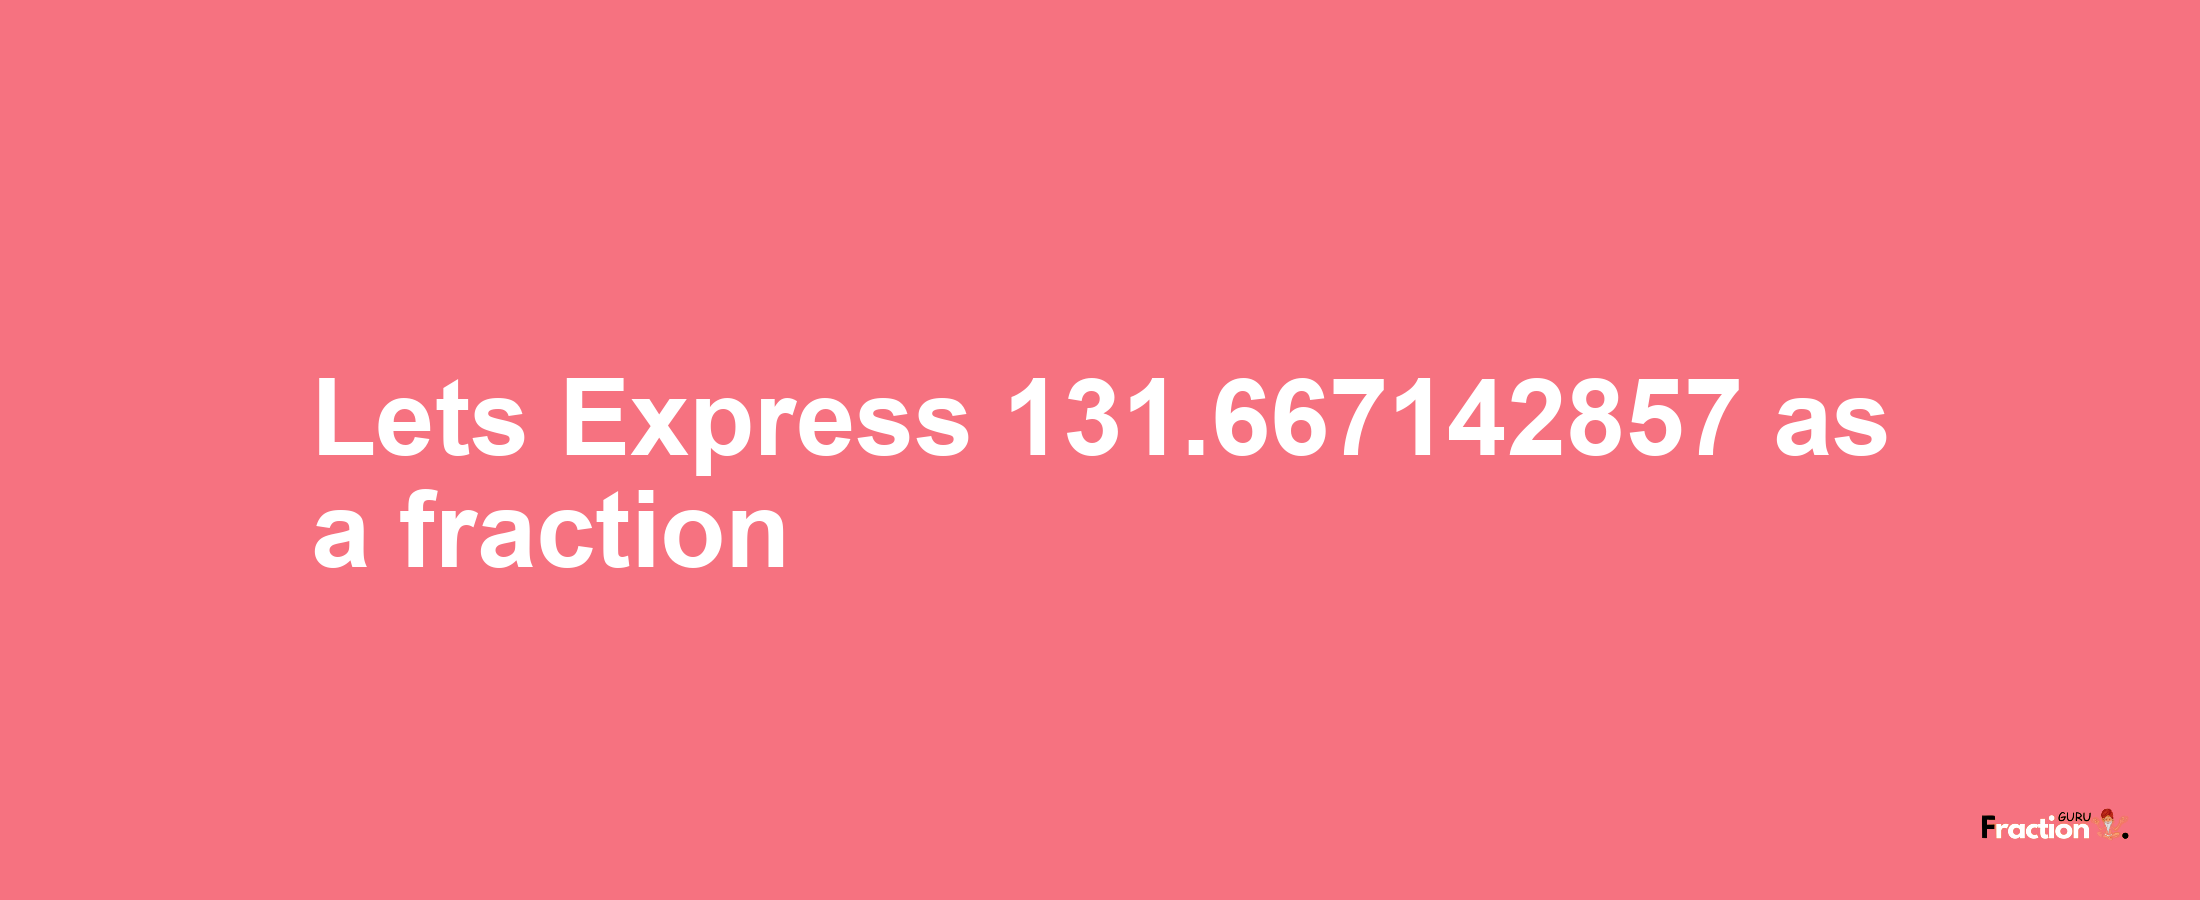 Lets Express 131.667142857 as afraction